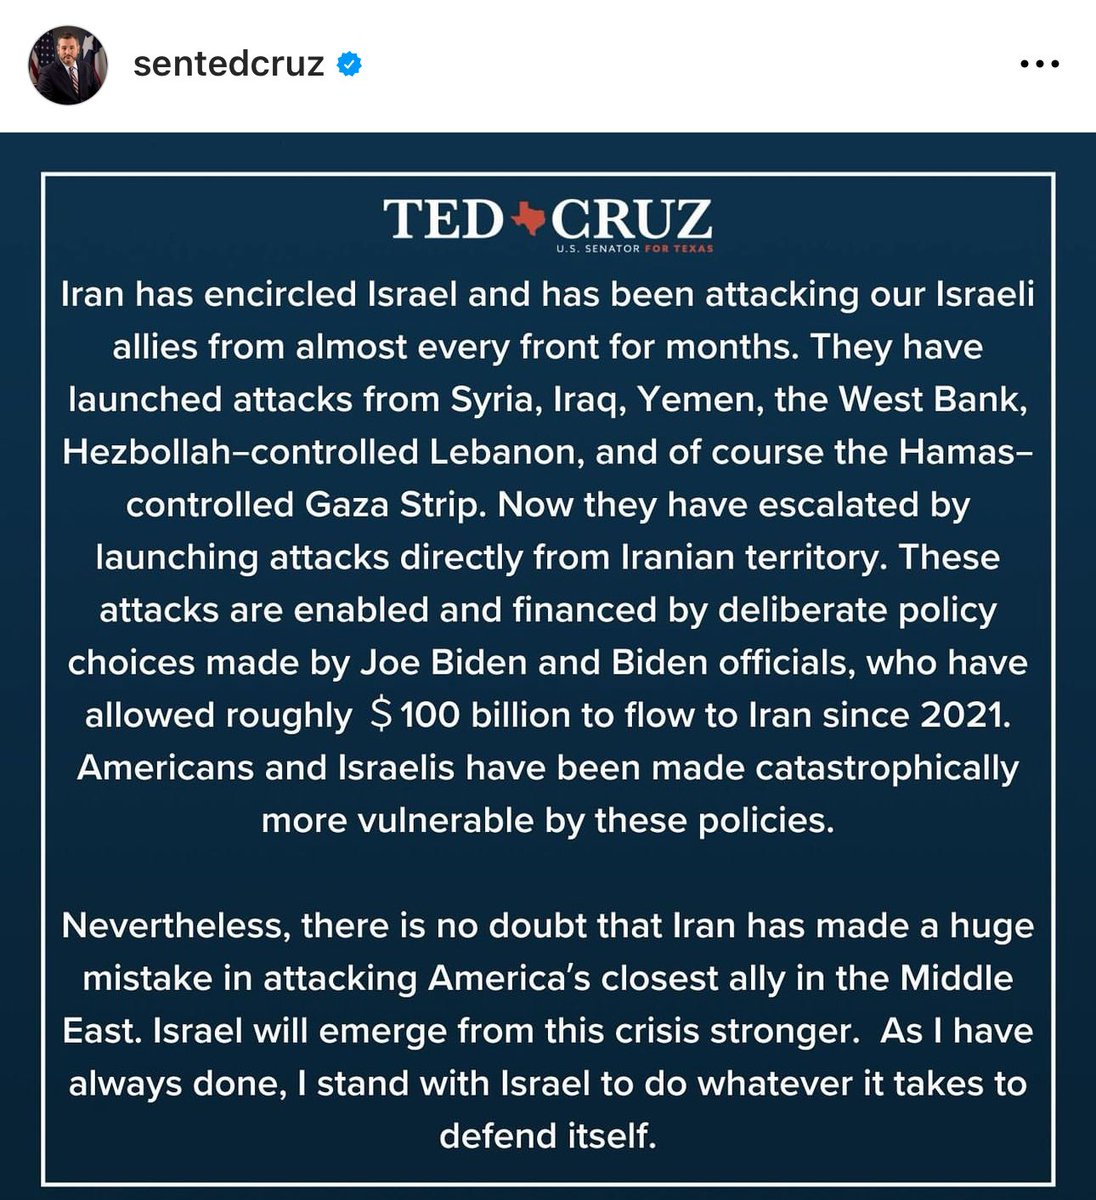 Therez that aipac money speaking